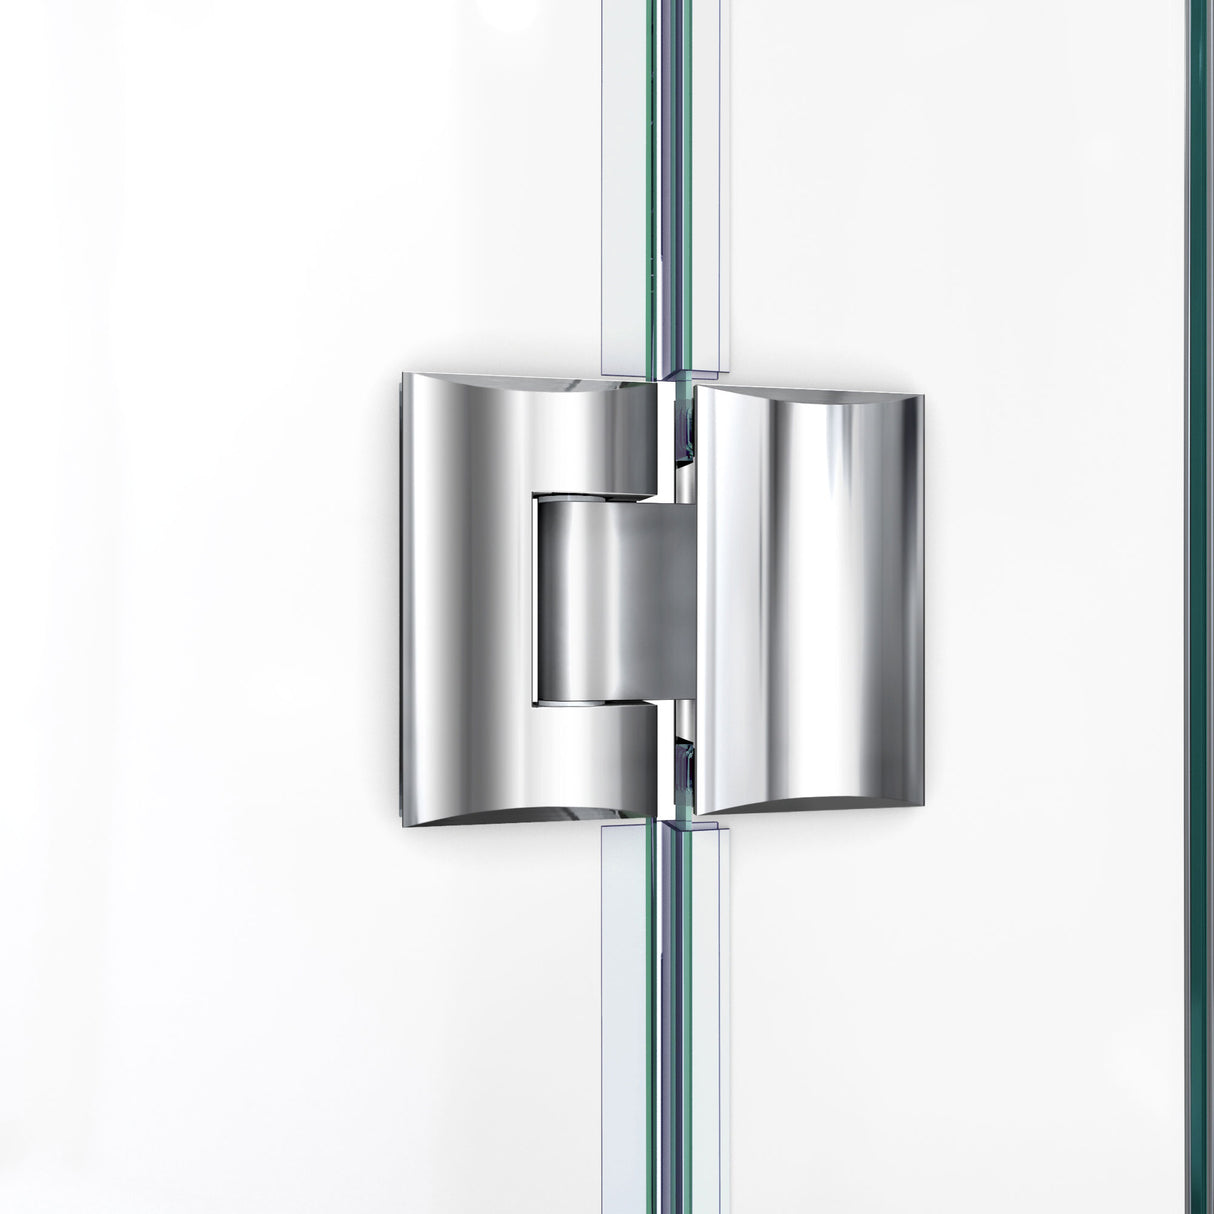 DreamLine Unidoor-X 57 1/2 in. W x 34 3/8 in. D x 72 in. H Frameless Hinged Shower Enclosure in Chrome